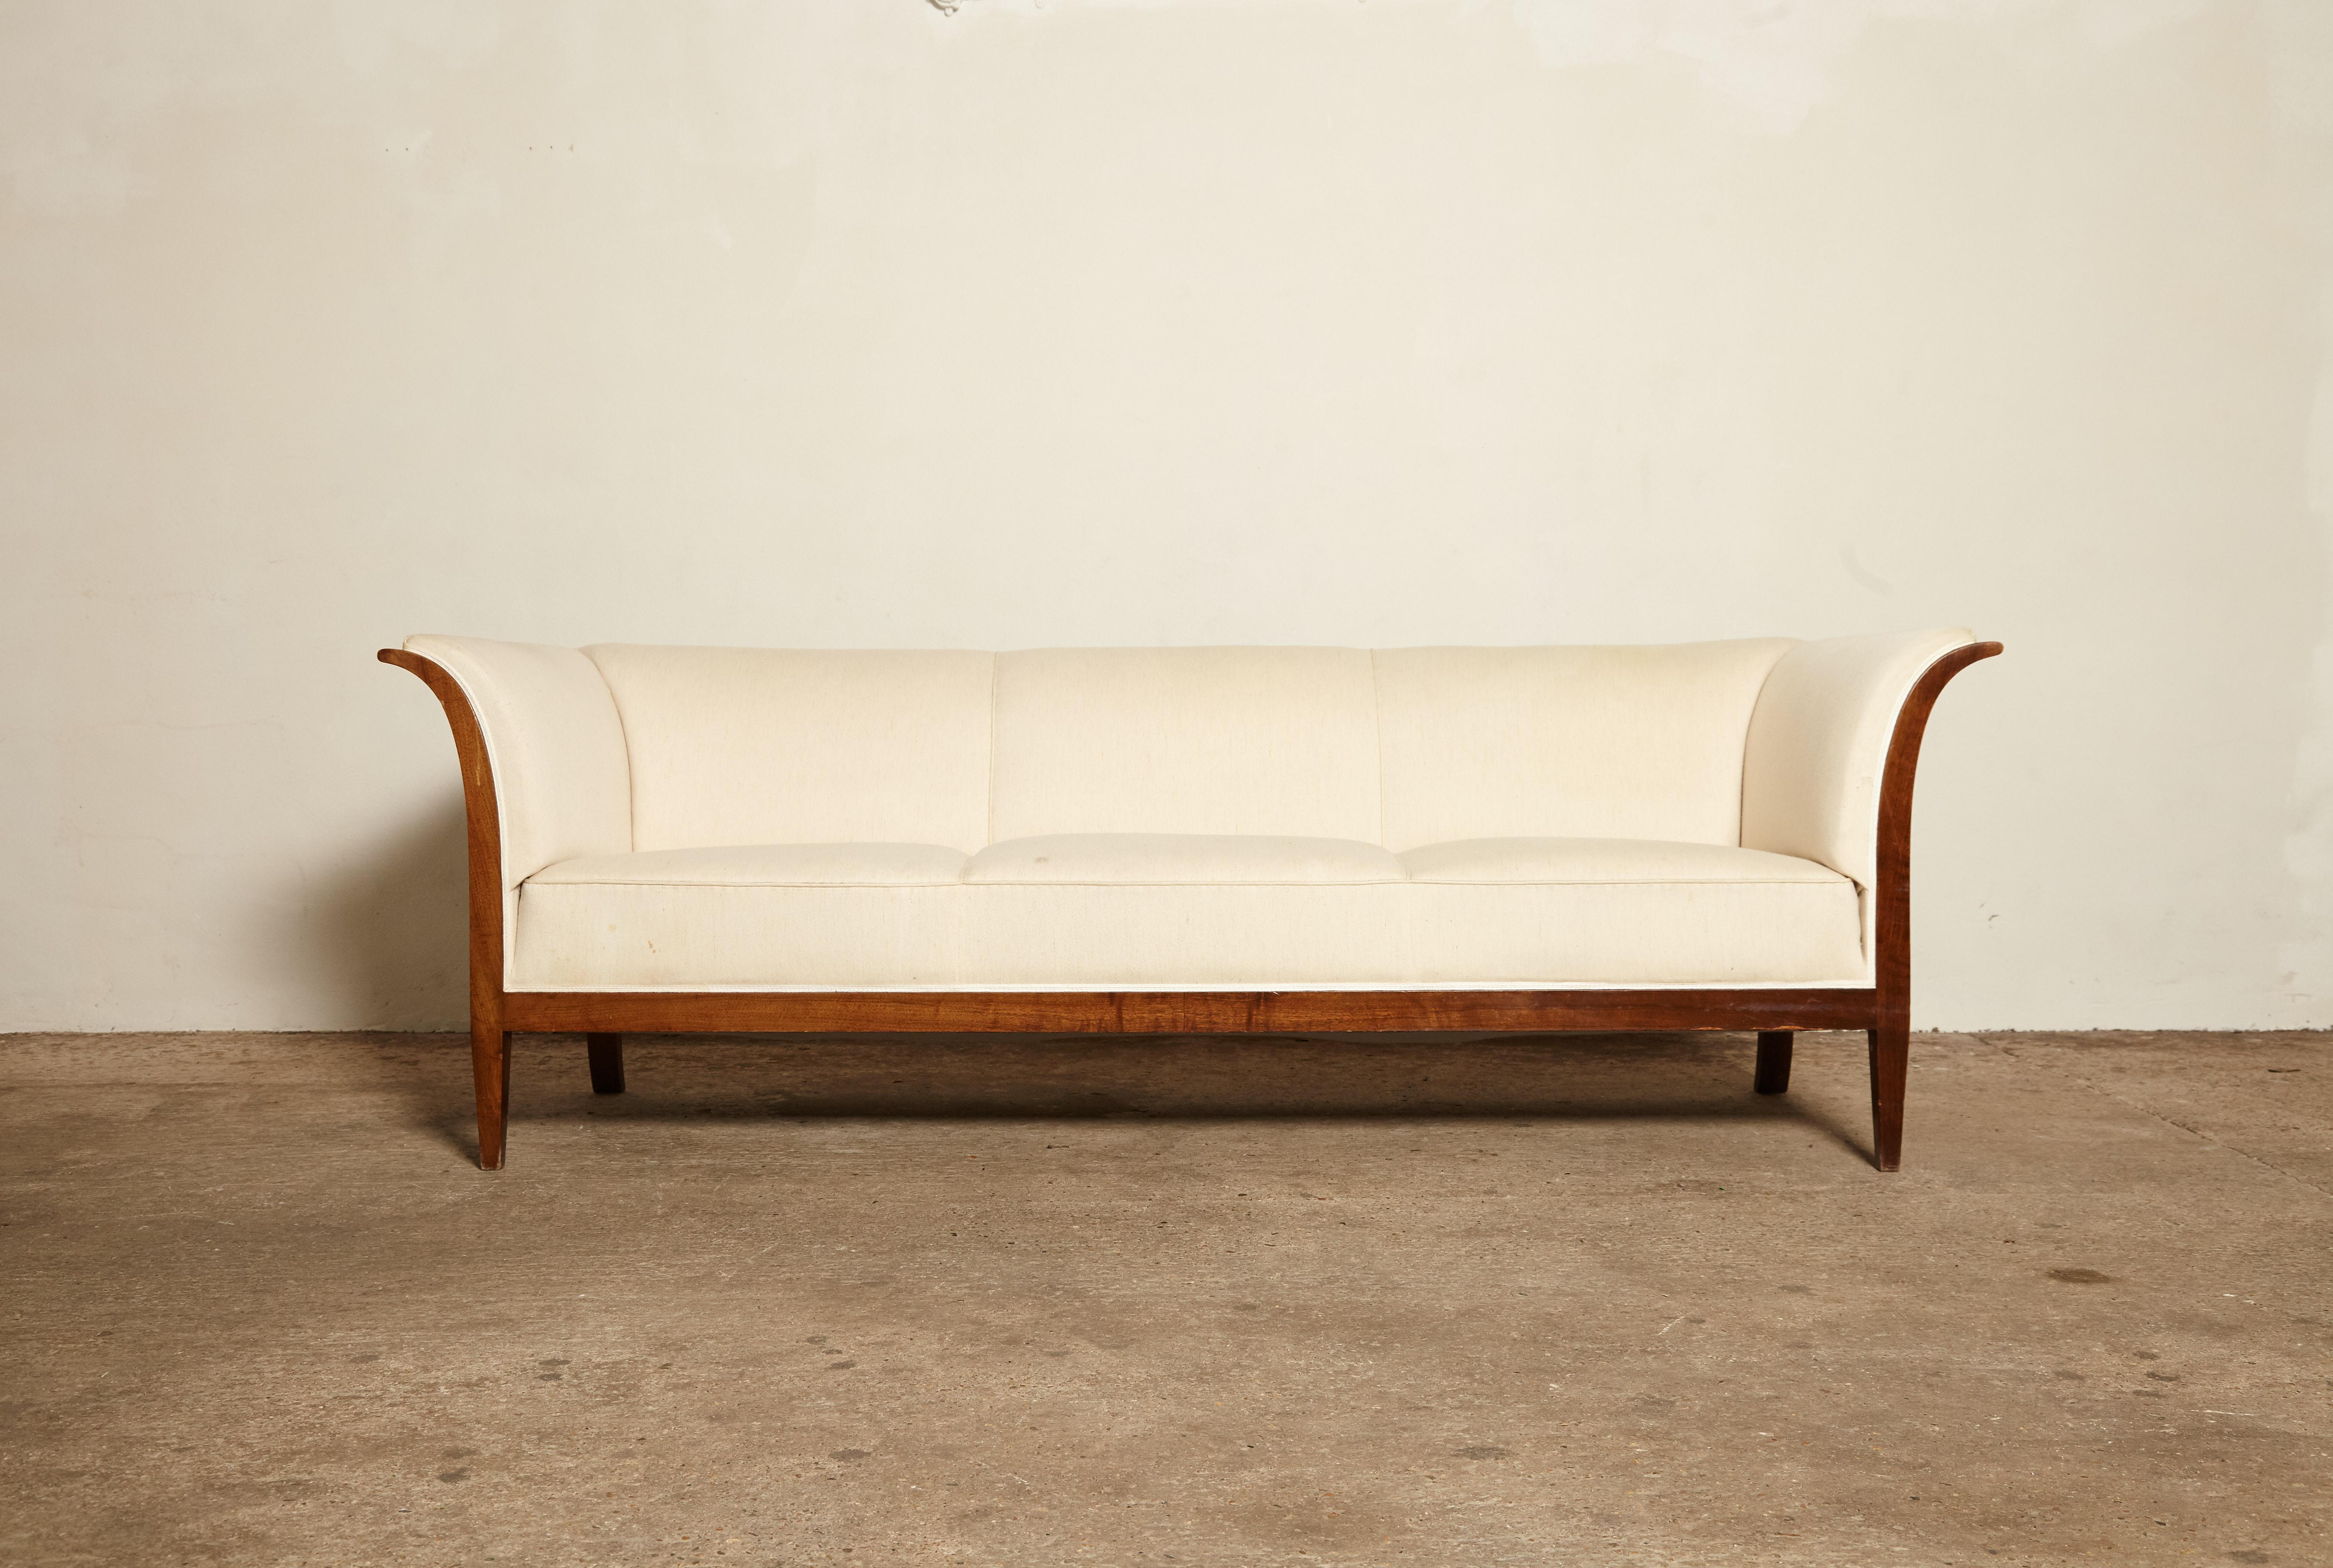 An original Frits Henningsen sofa, Denmark, 1940s-1950s for re-covering. Designed and produced by Frits Henningsen, Copenhagen. The fabric is stained and has some damage so this sofa requires re-covering. We can assist with re-covering if required.